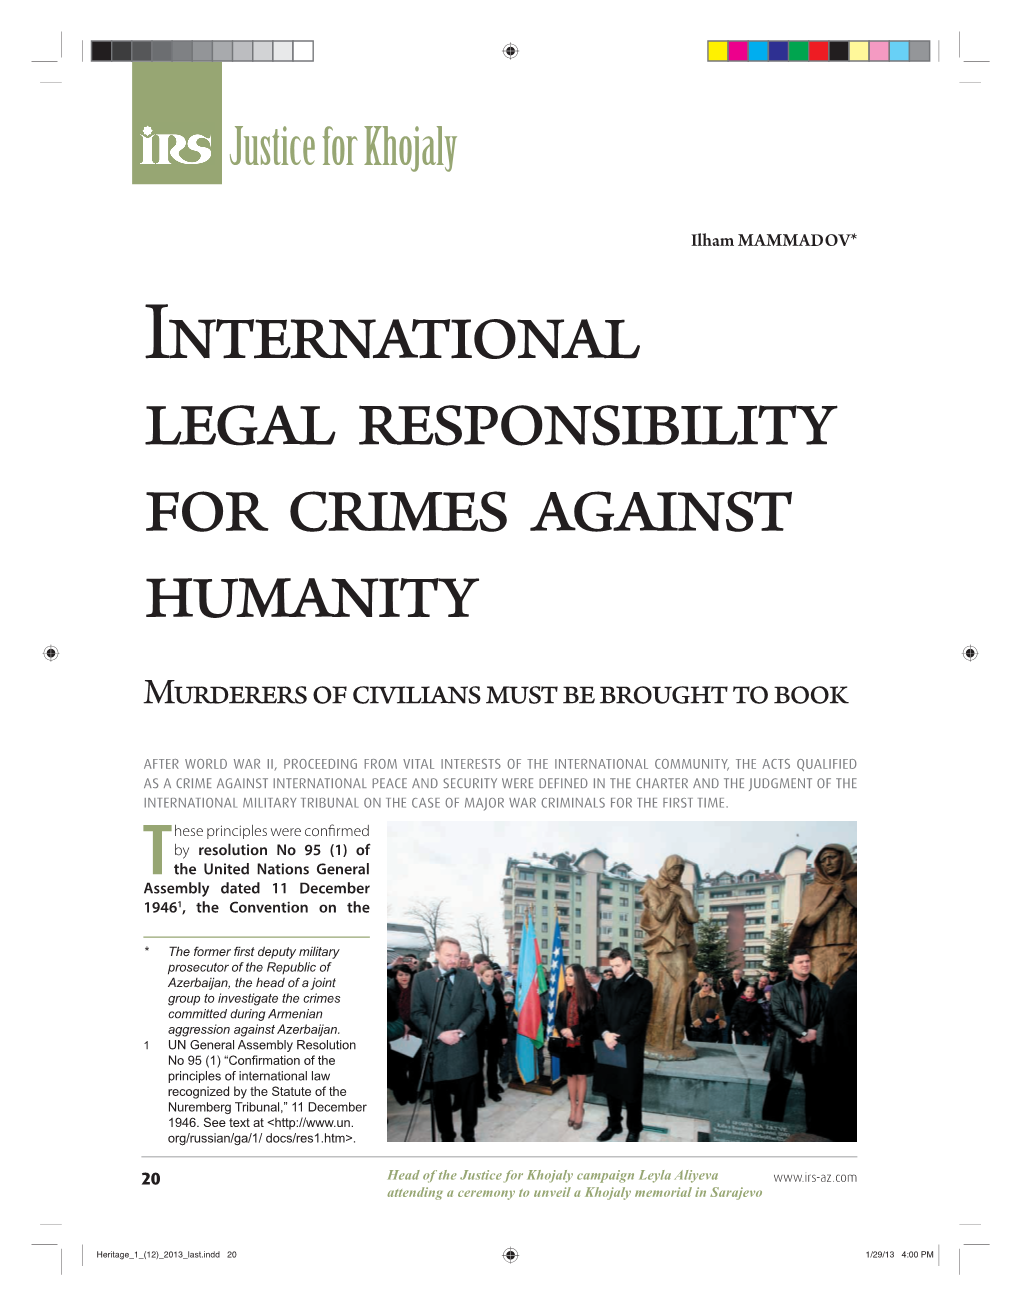 International Legal Responsibility for Crimes Against Humanity